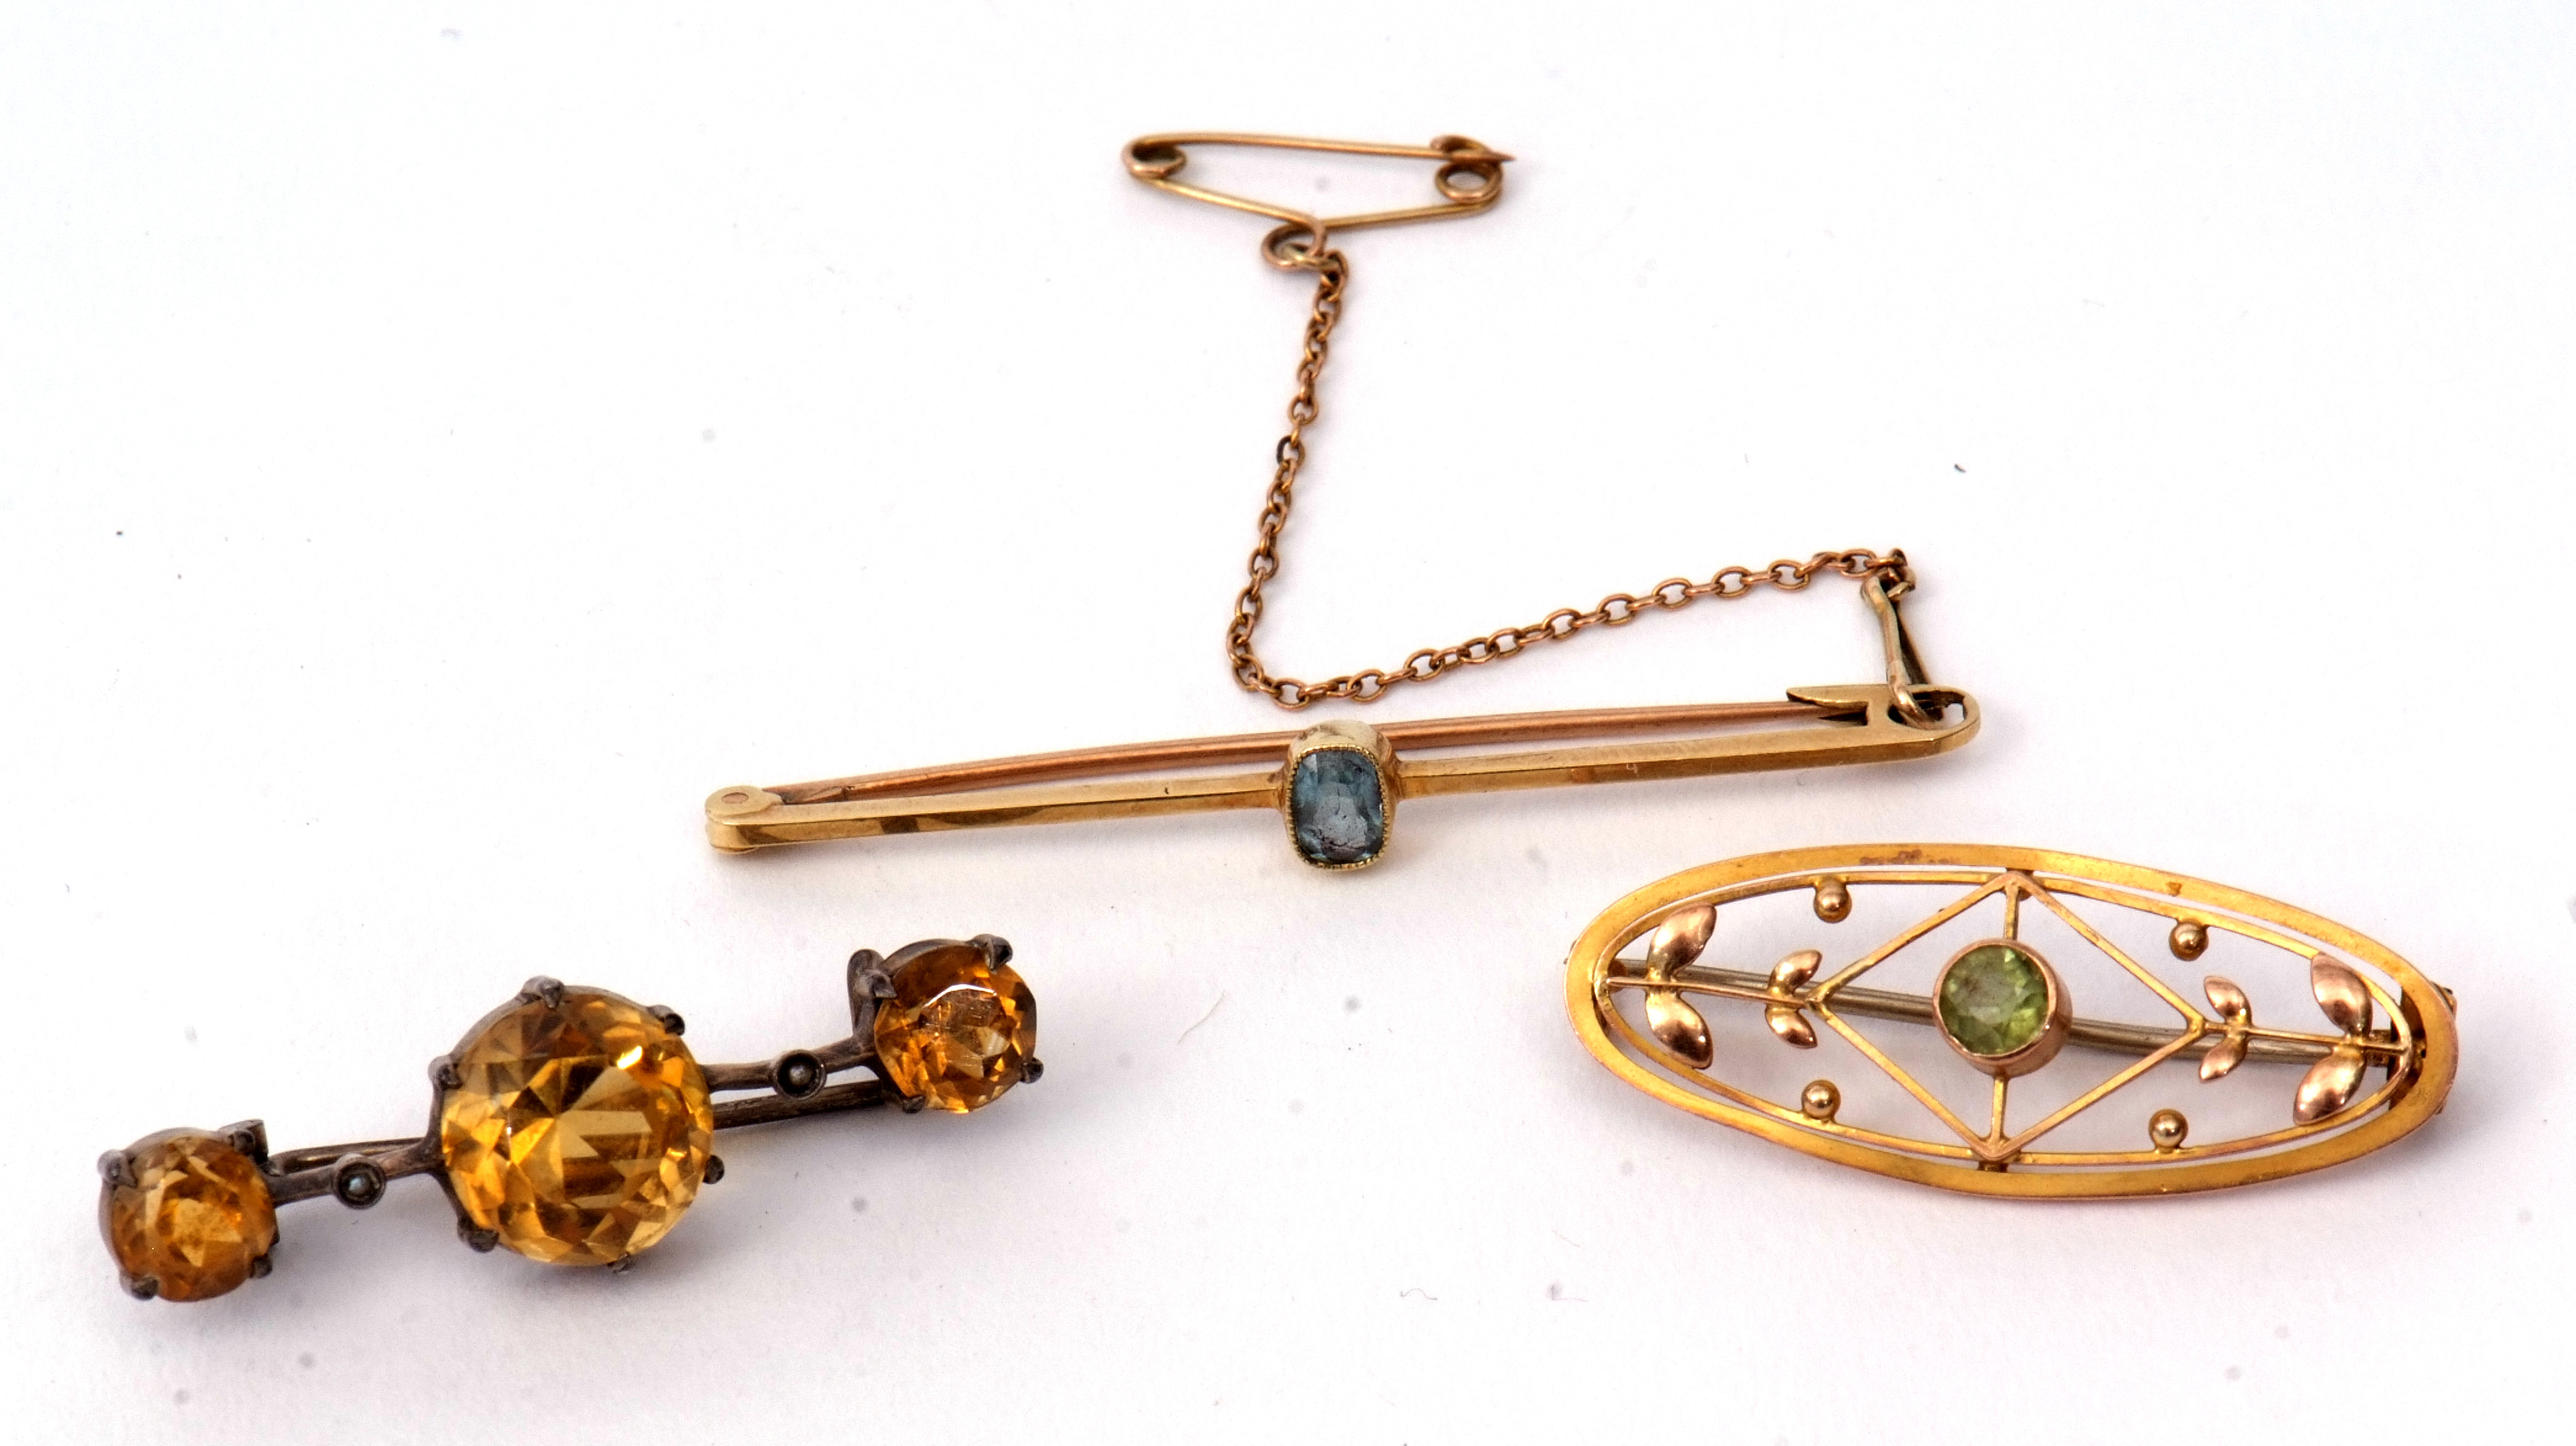 Mixed Lot: Edwardian 9ct open work brooch set with a central bezel set peridot, a 15ct stamped